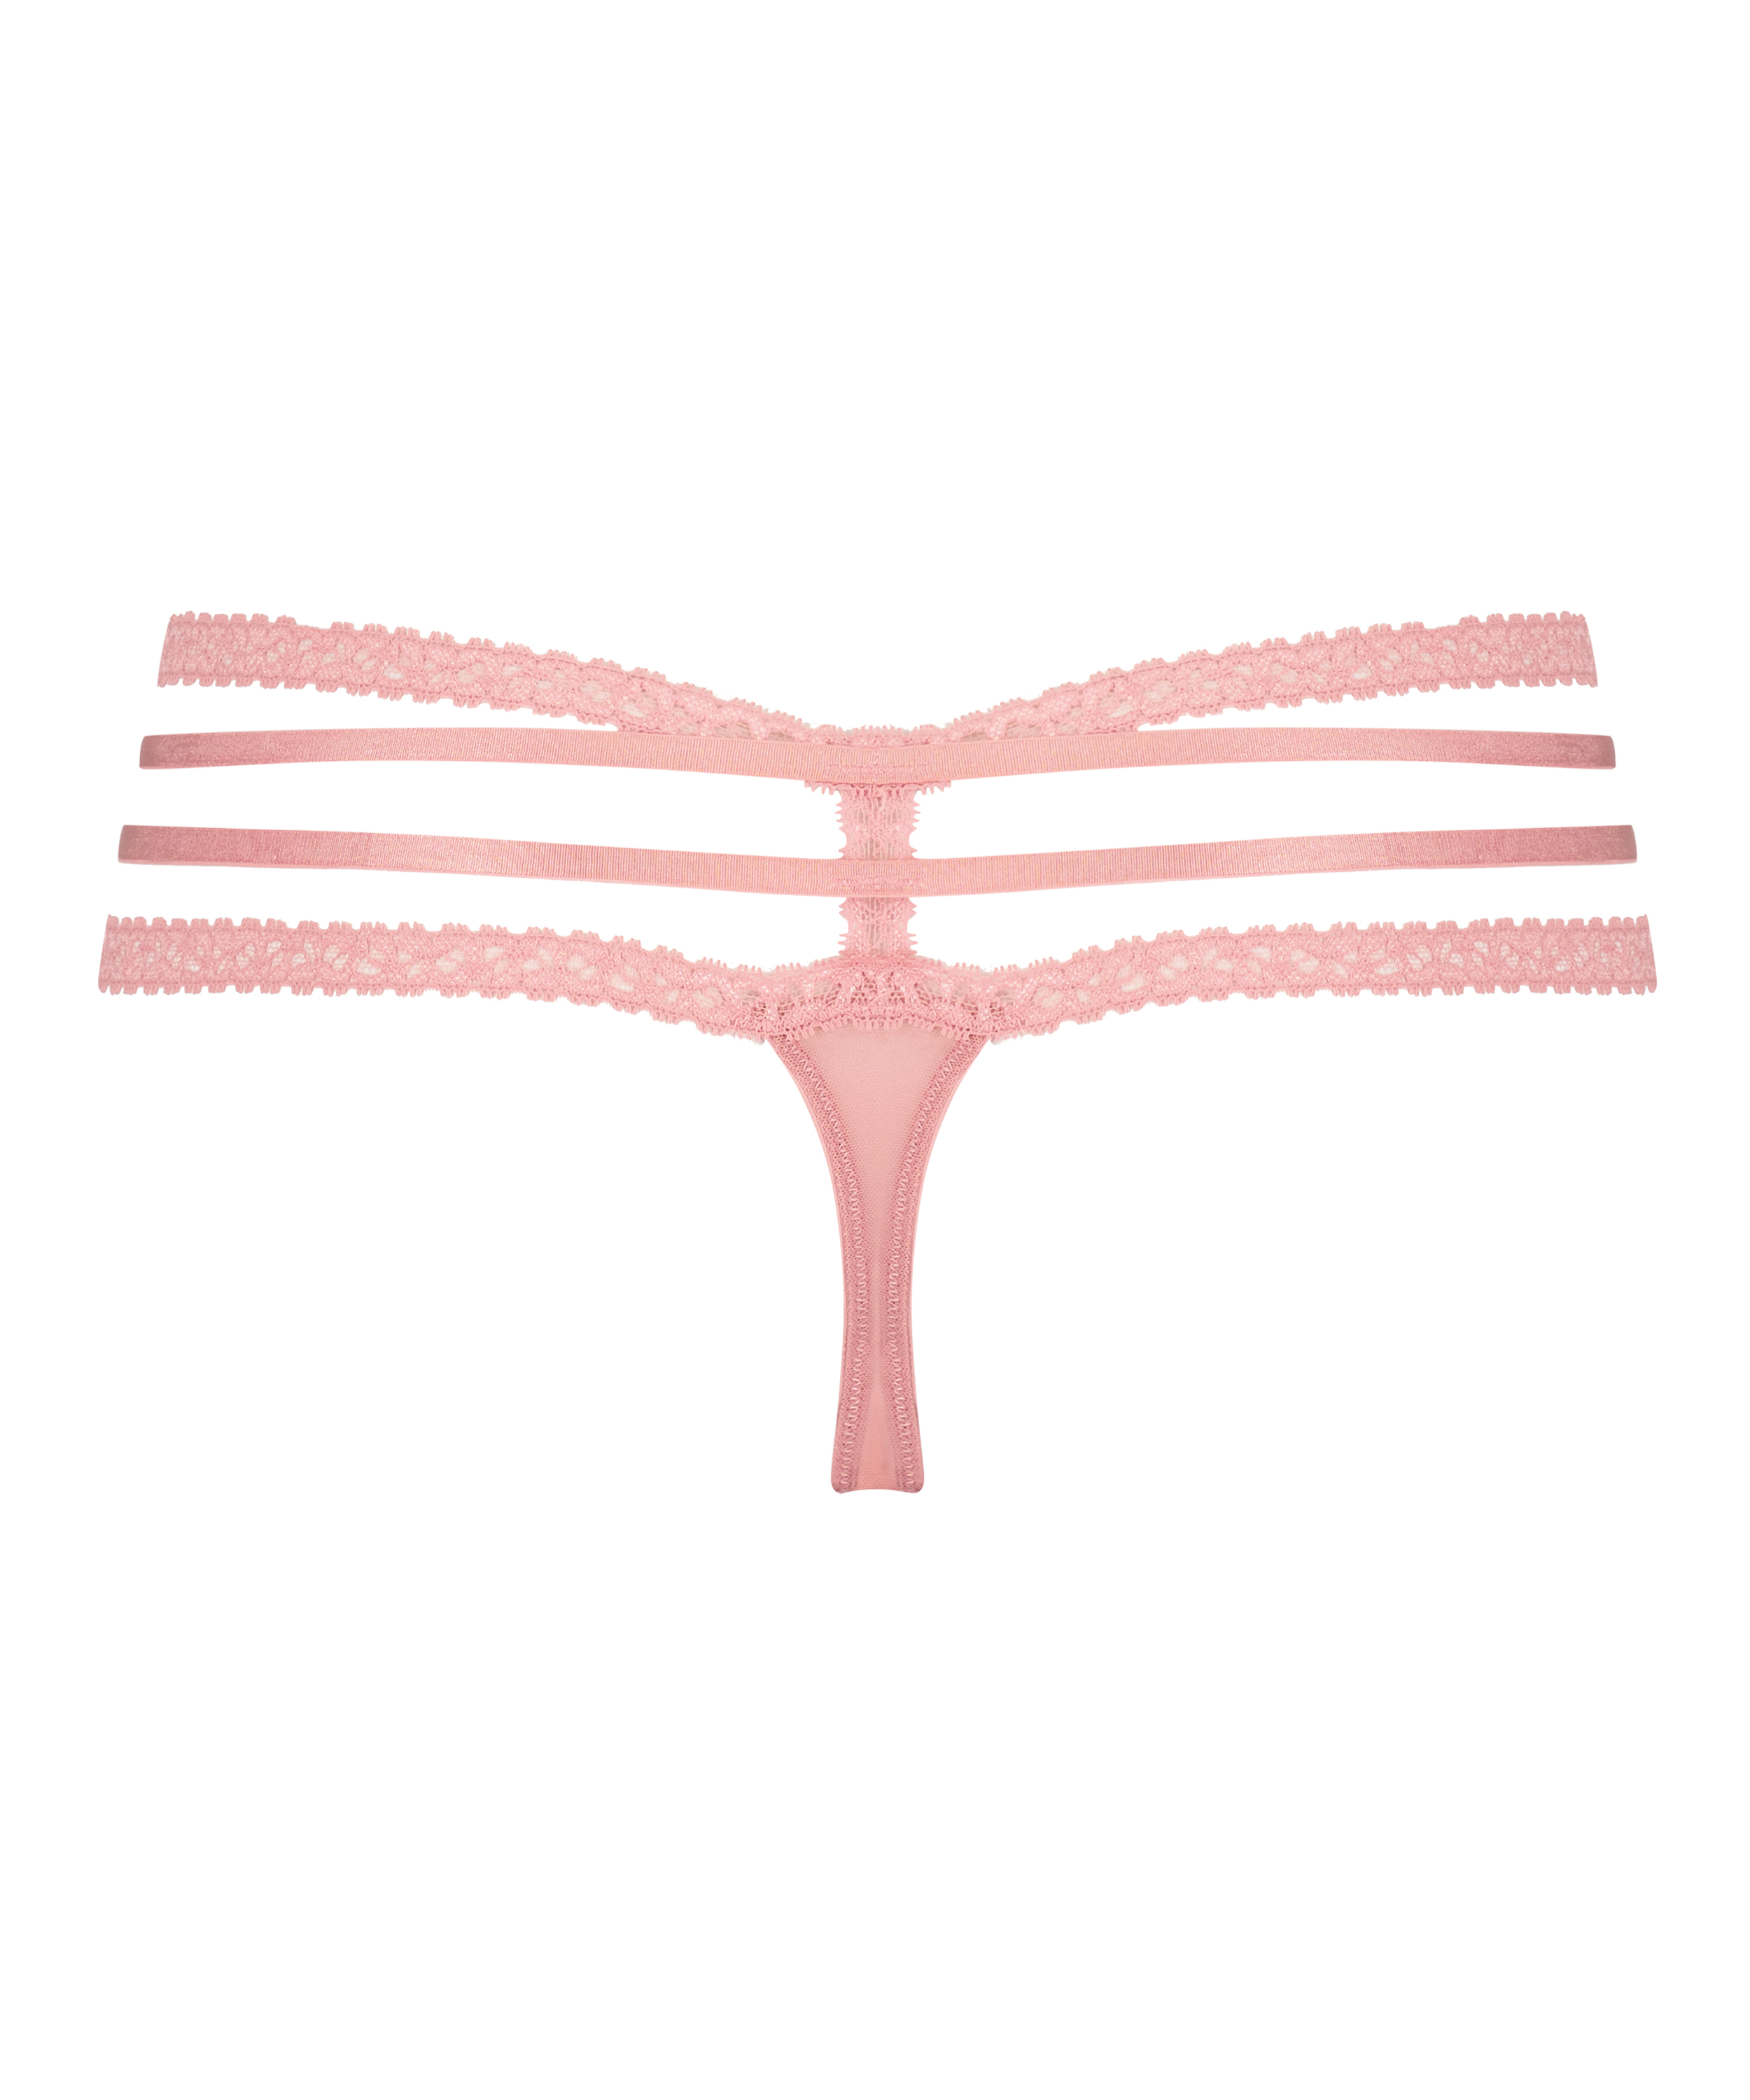 String taille extra basse Lorraine, Violet, main